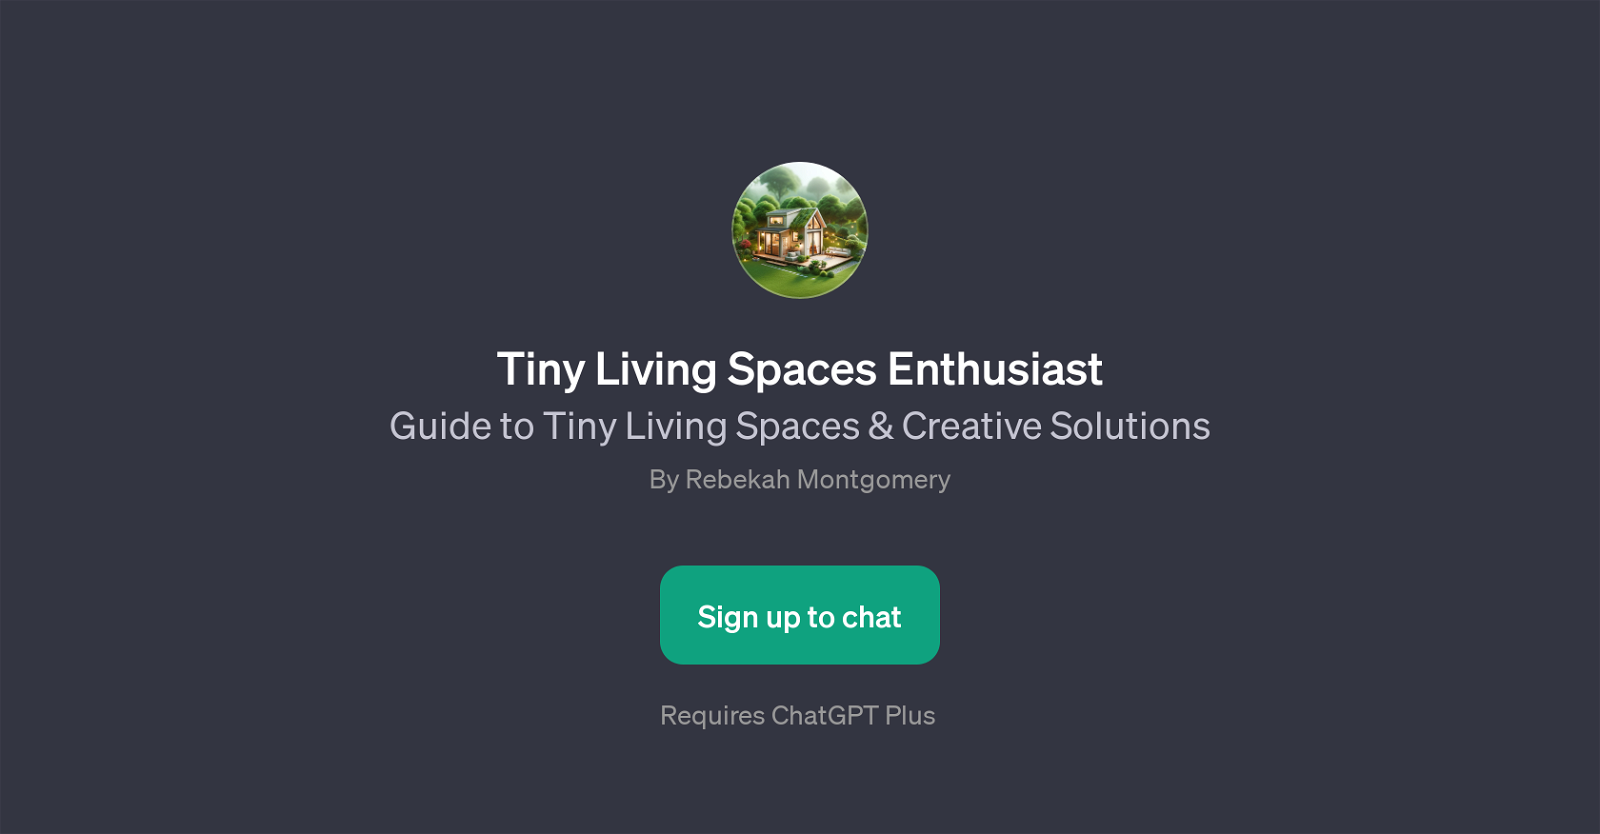 Tiny Living Spaces Enthusiast website